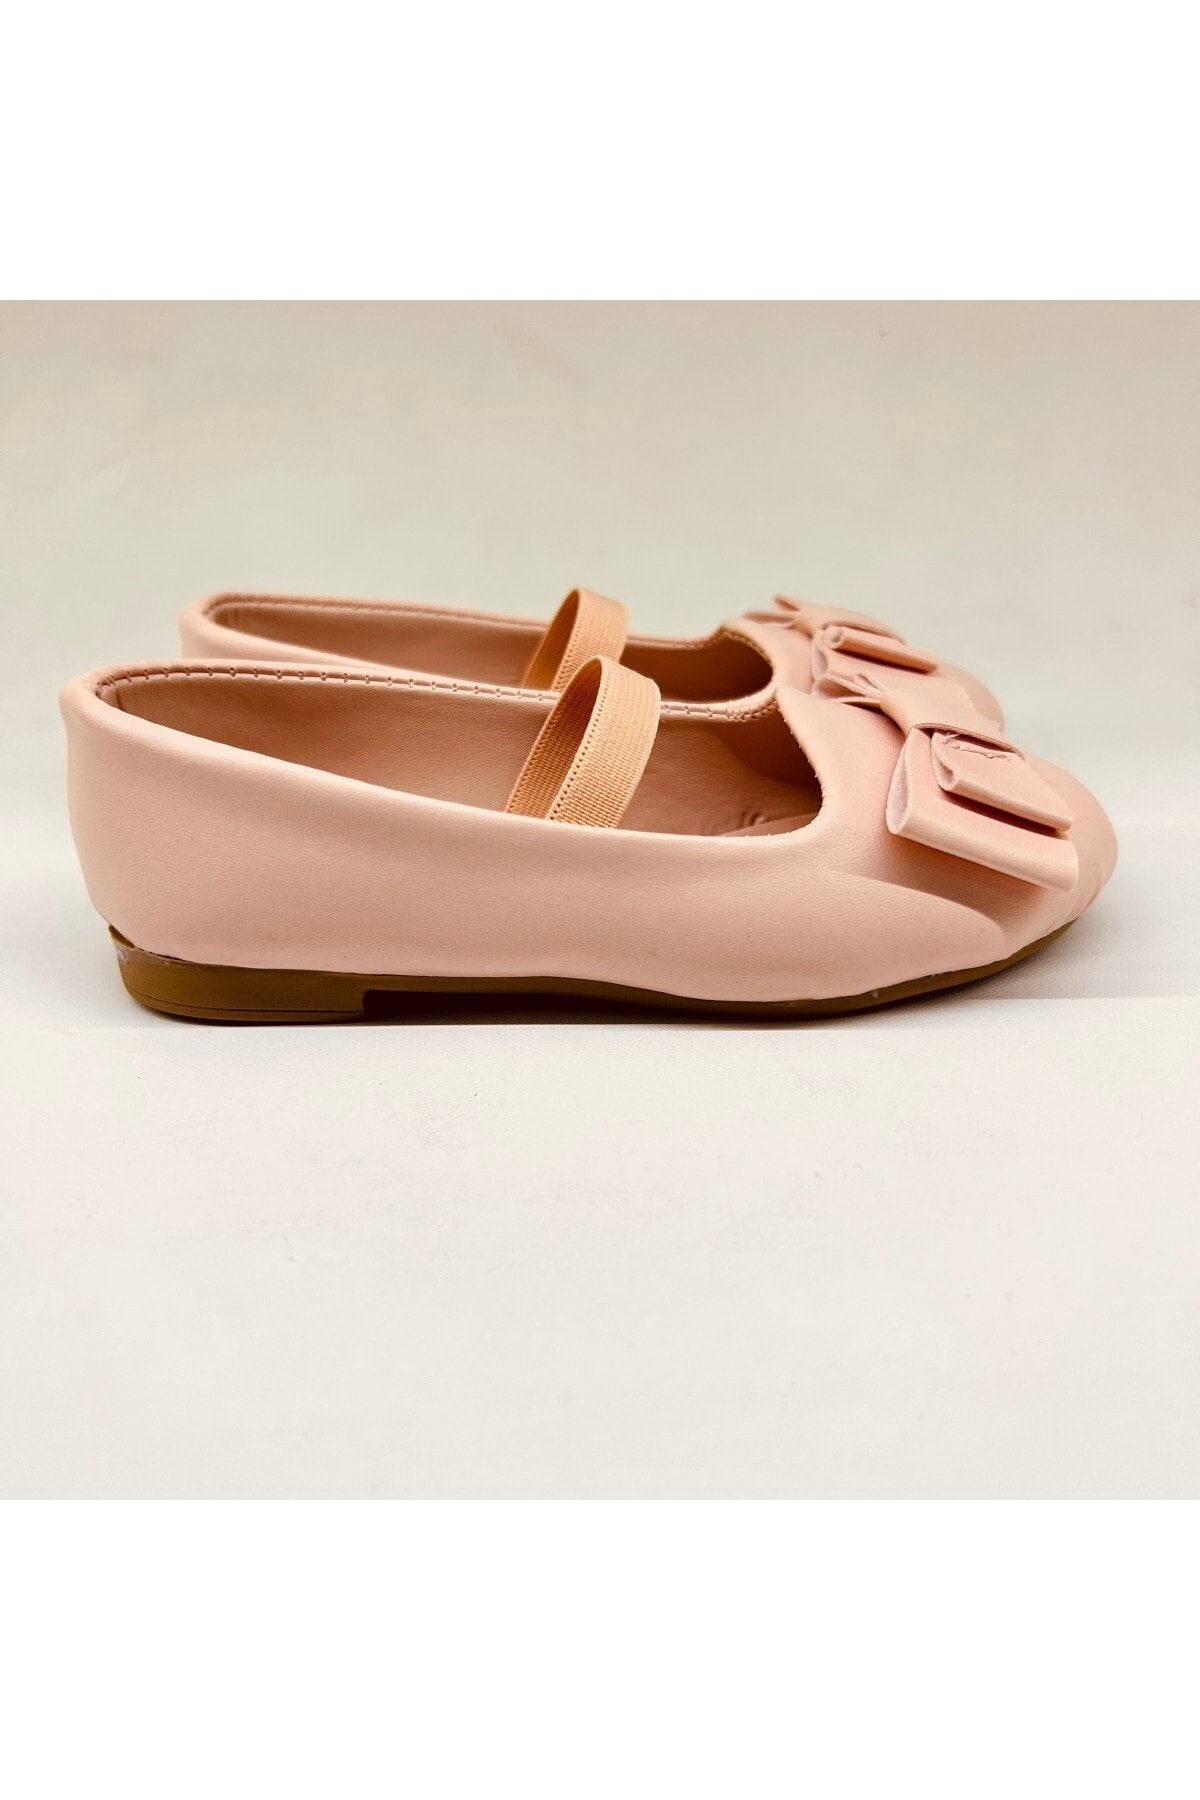 Shoes Girls' Bow Tie Detailed Powder Flat Shoes